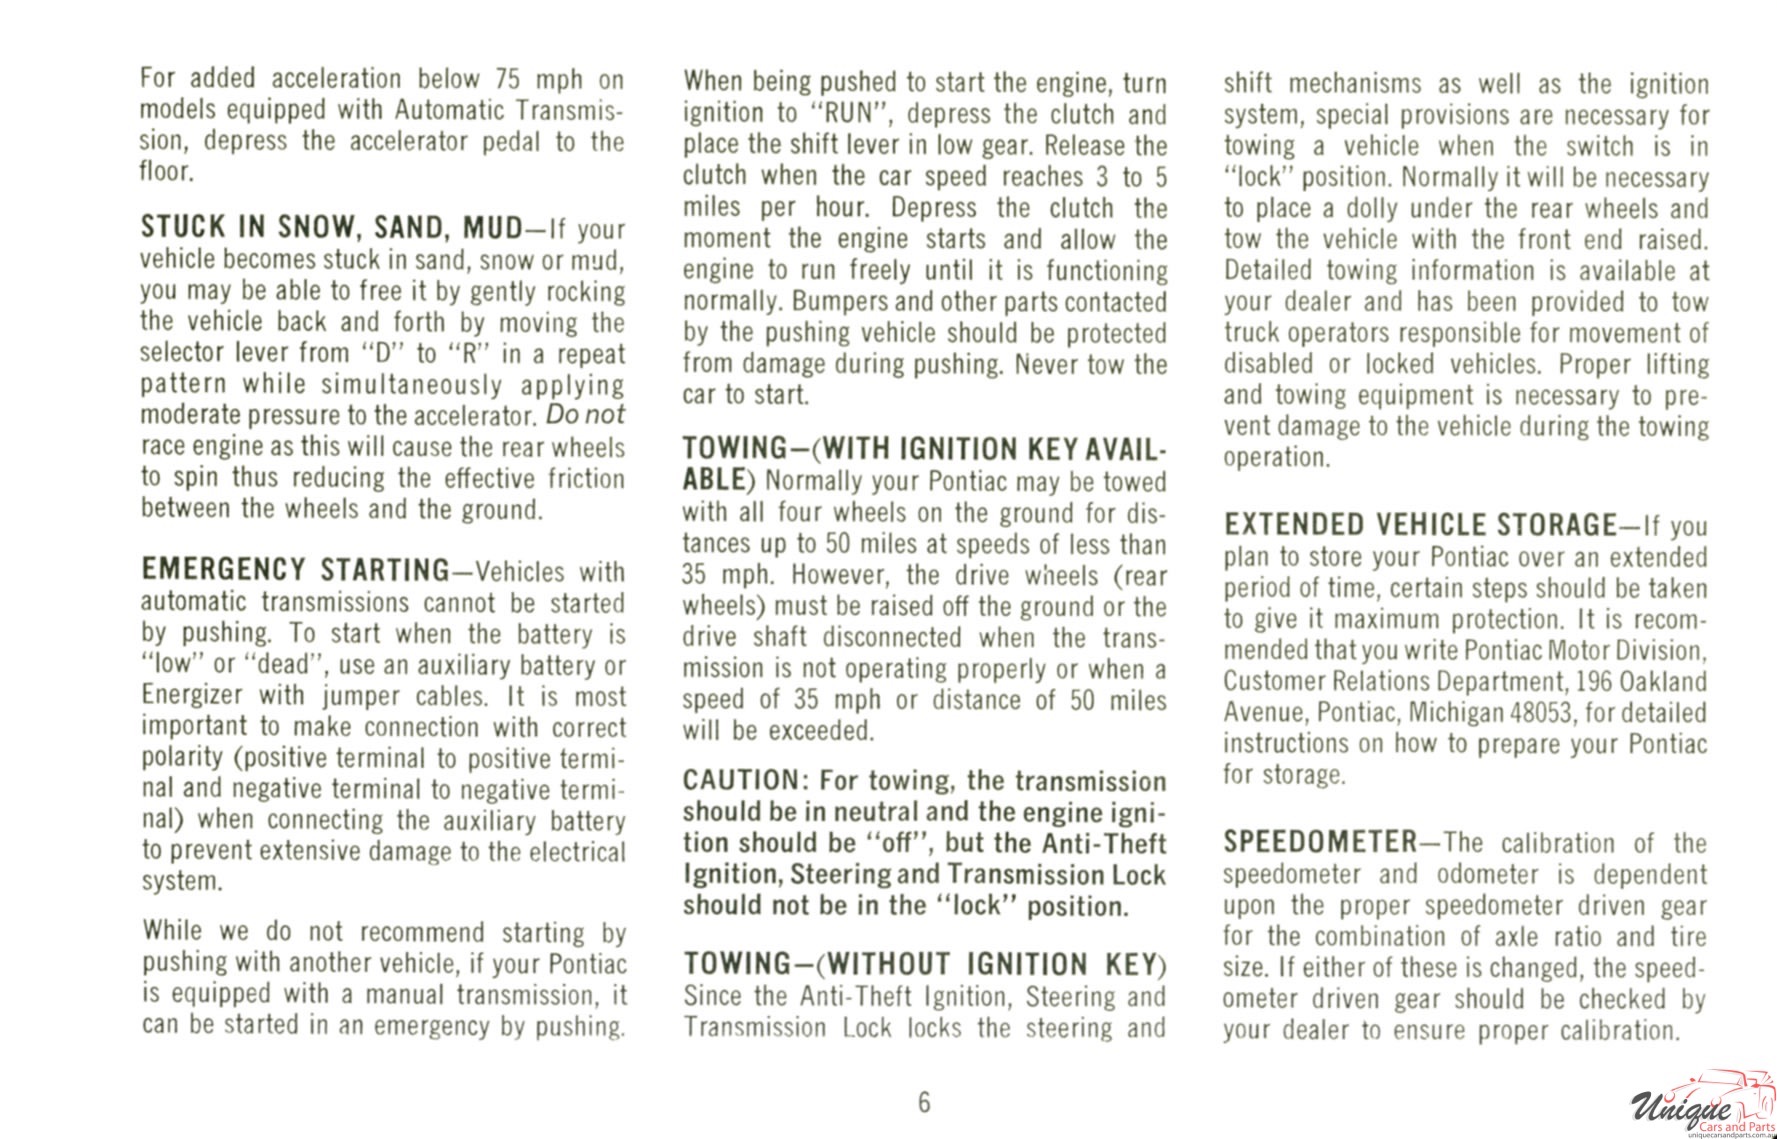 1969 Pontiac Owners Manual Page 21